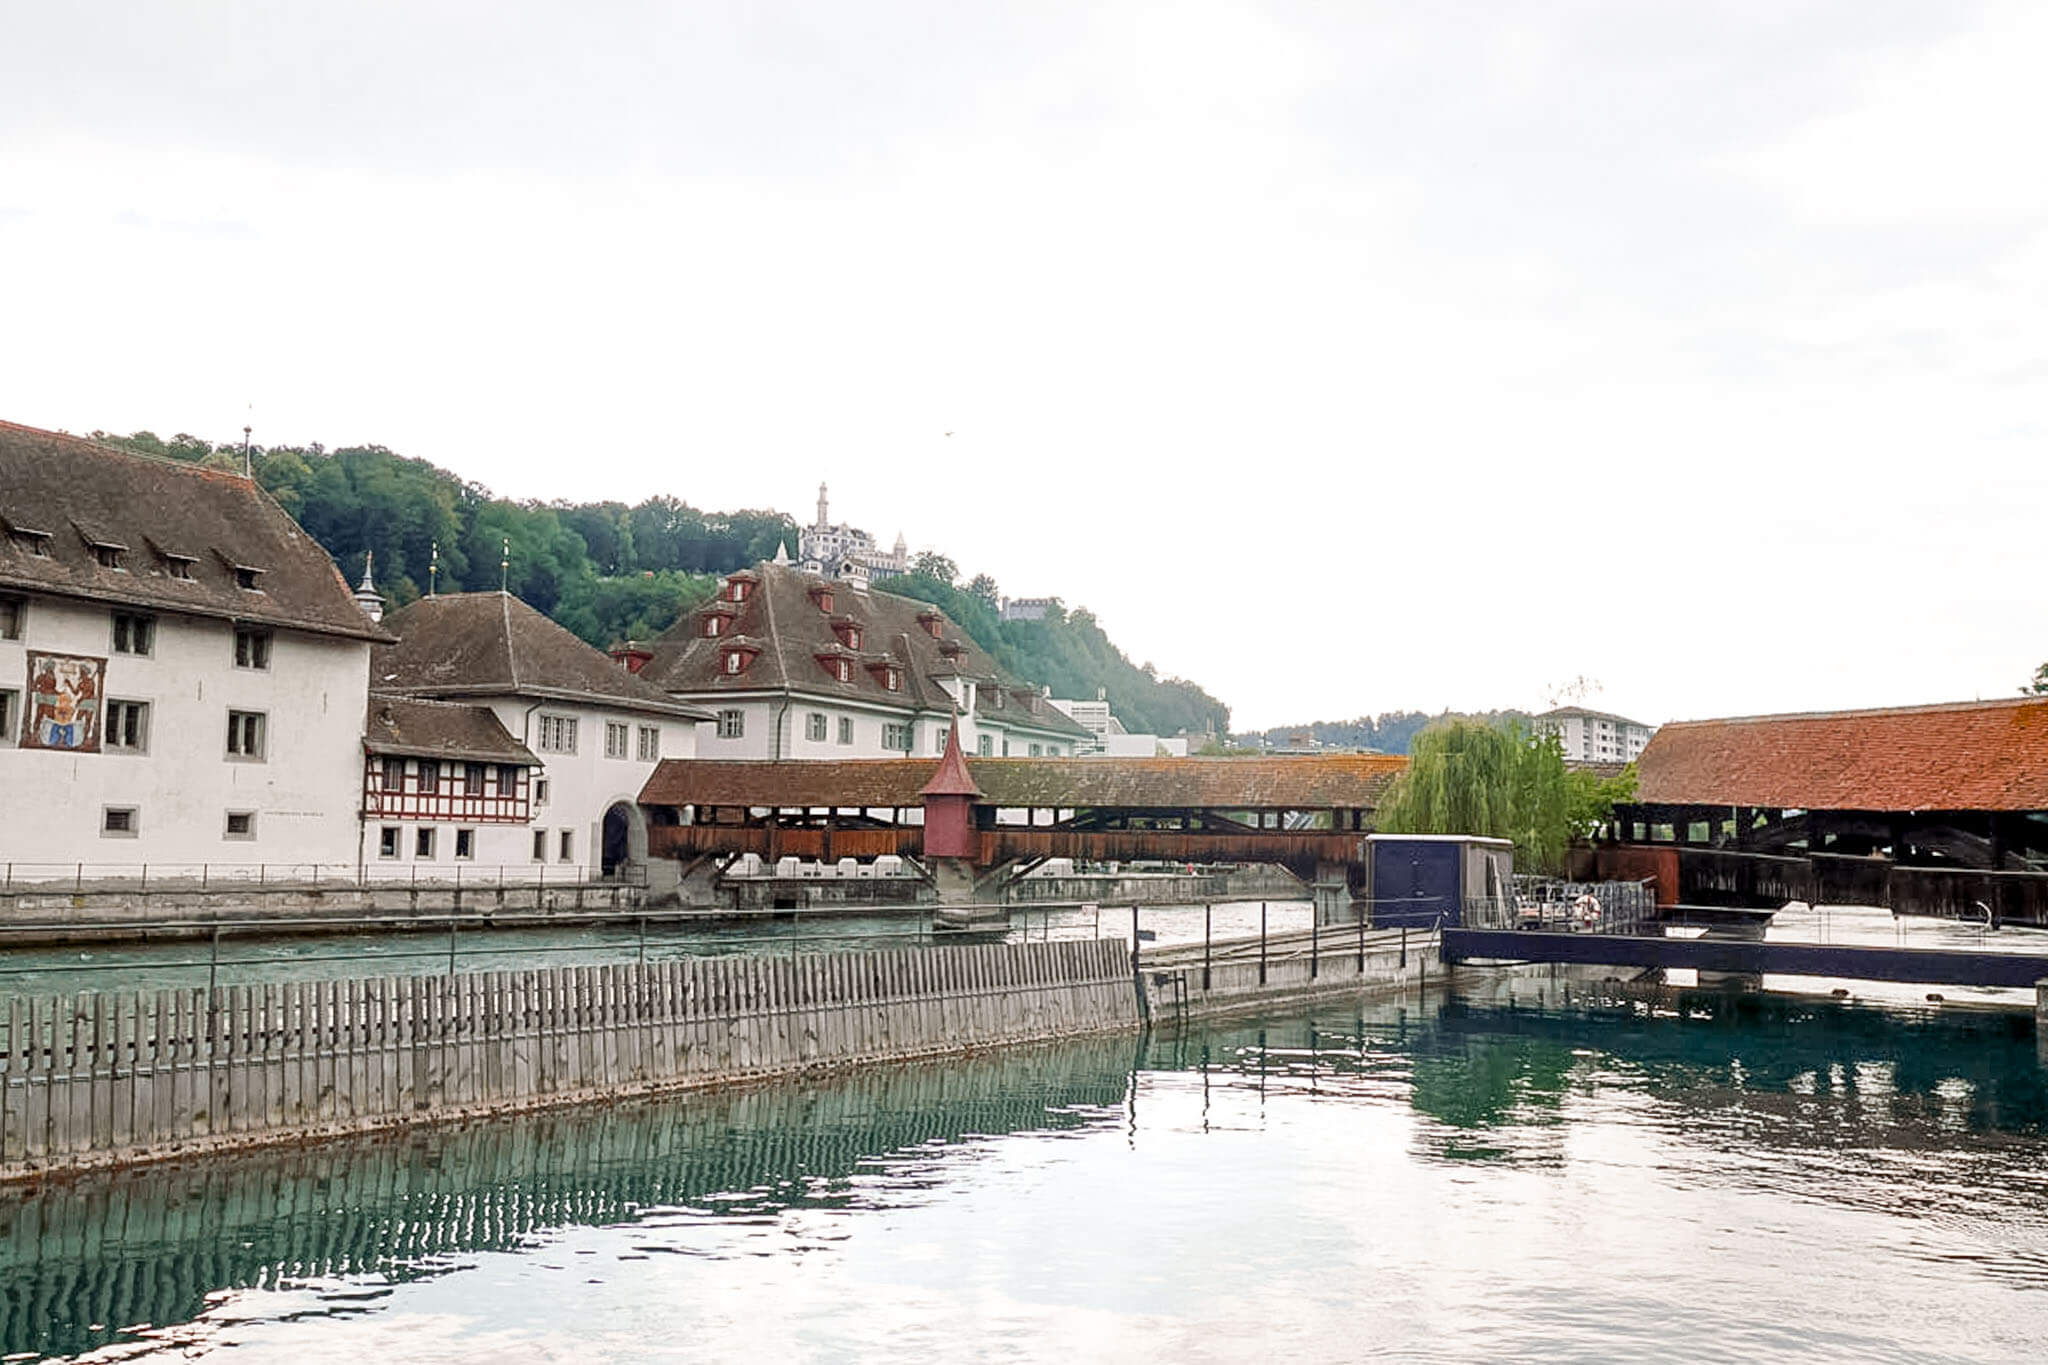 A weekend guide to Lucerne, Switzerland